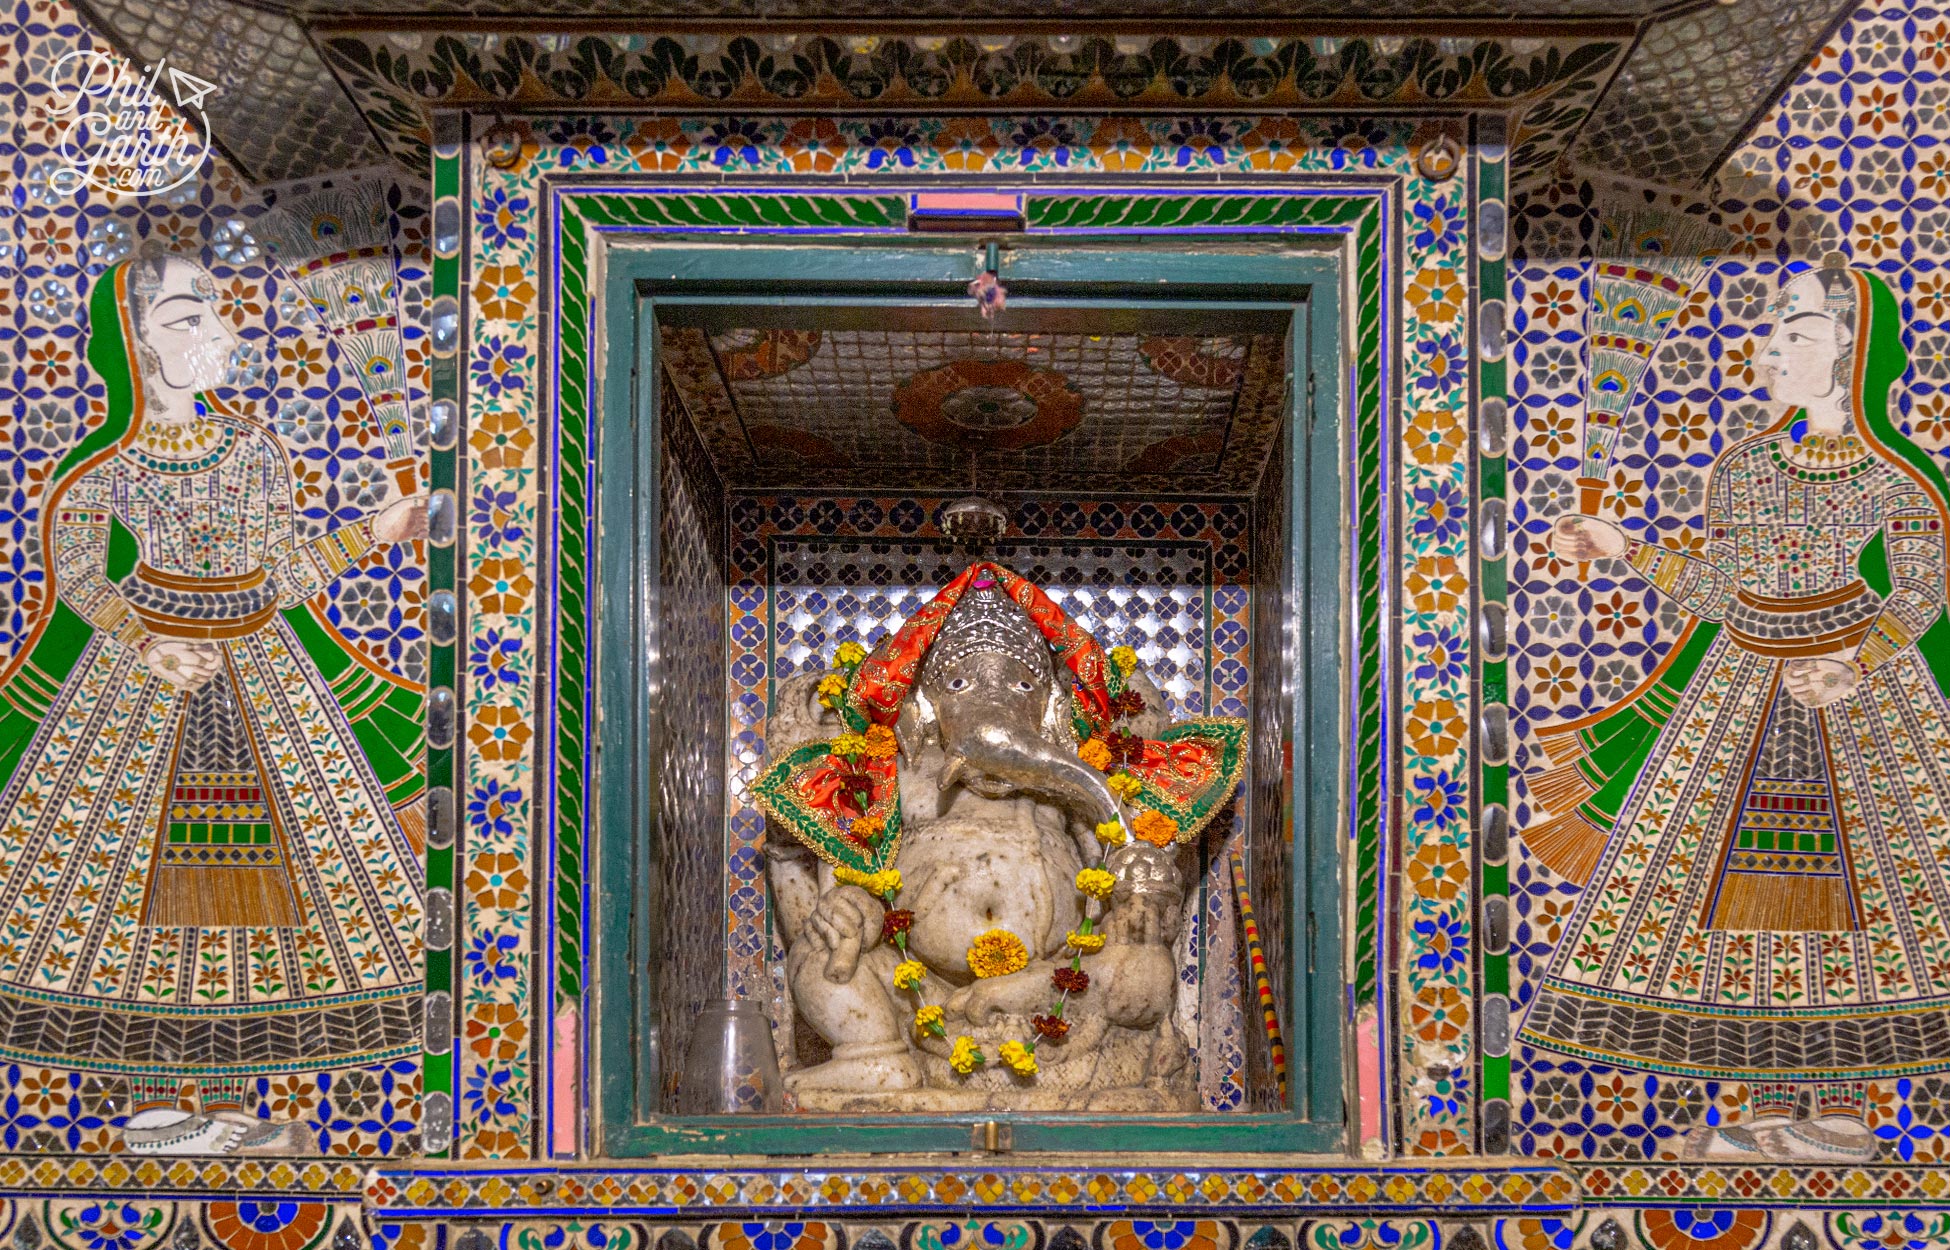 As you pass the entrance a small statute of Ganesh from 1620 welcomes you to the palace